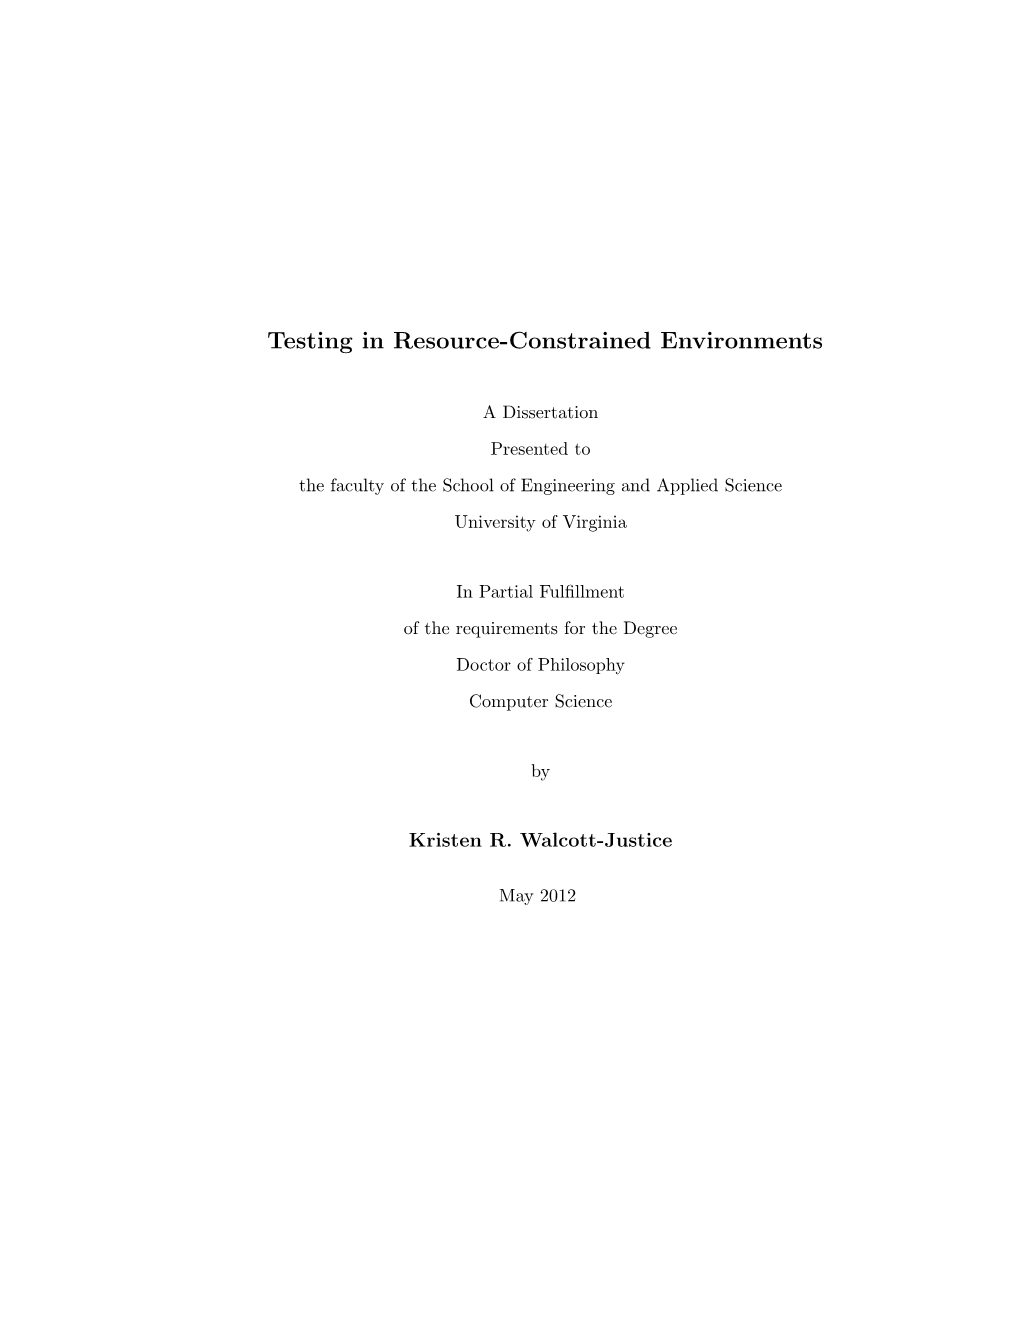 Testing in Resource-Constrained Environments